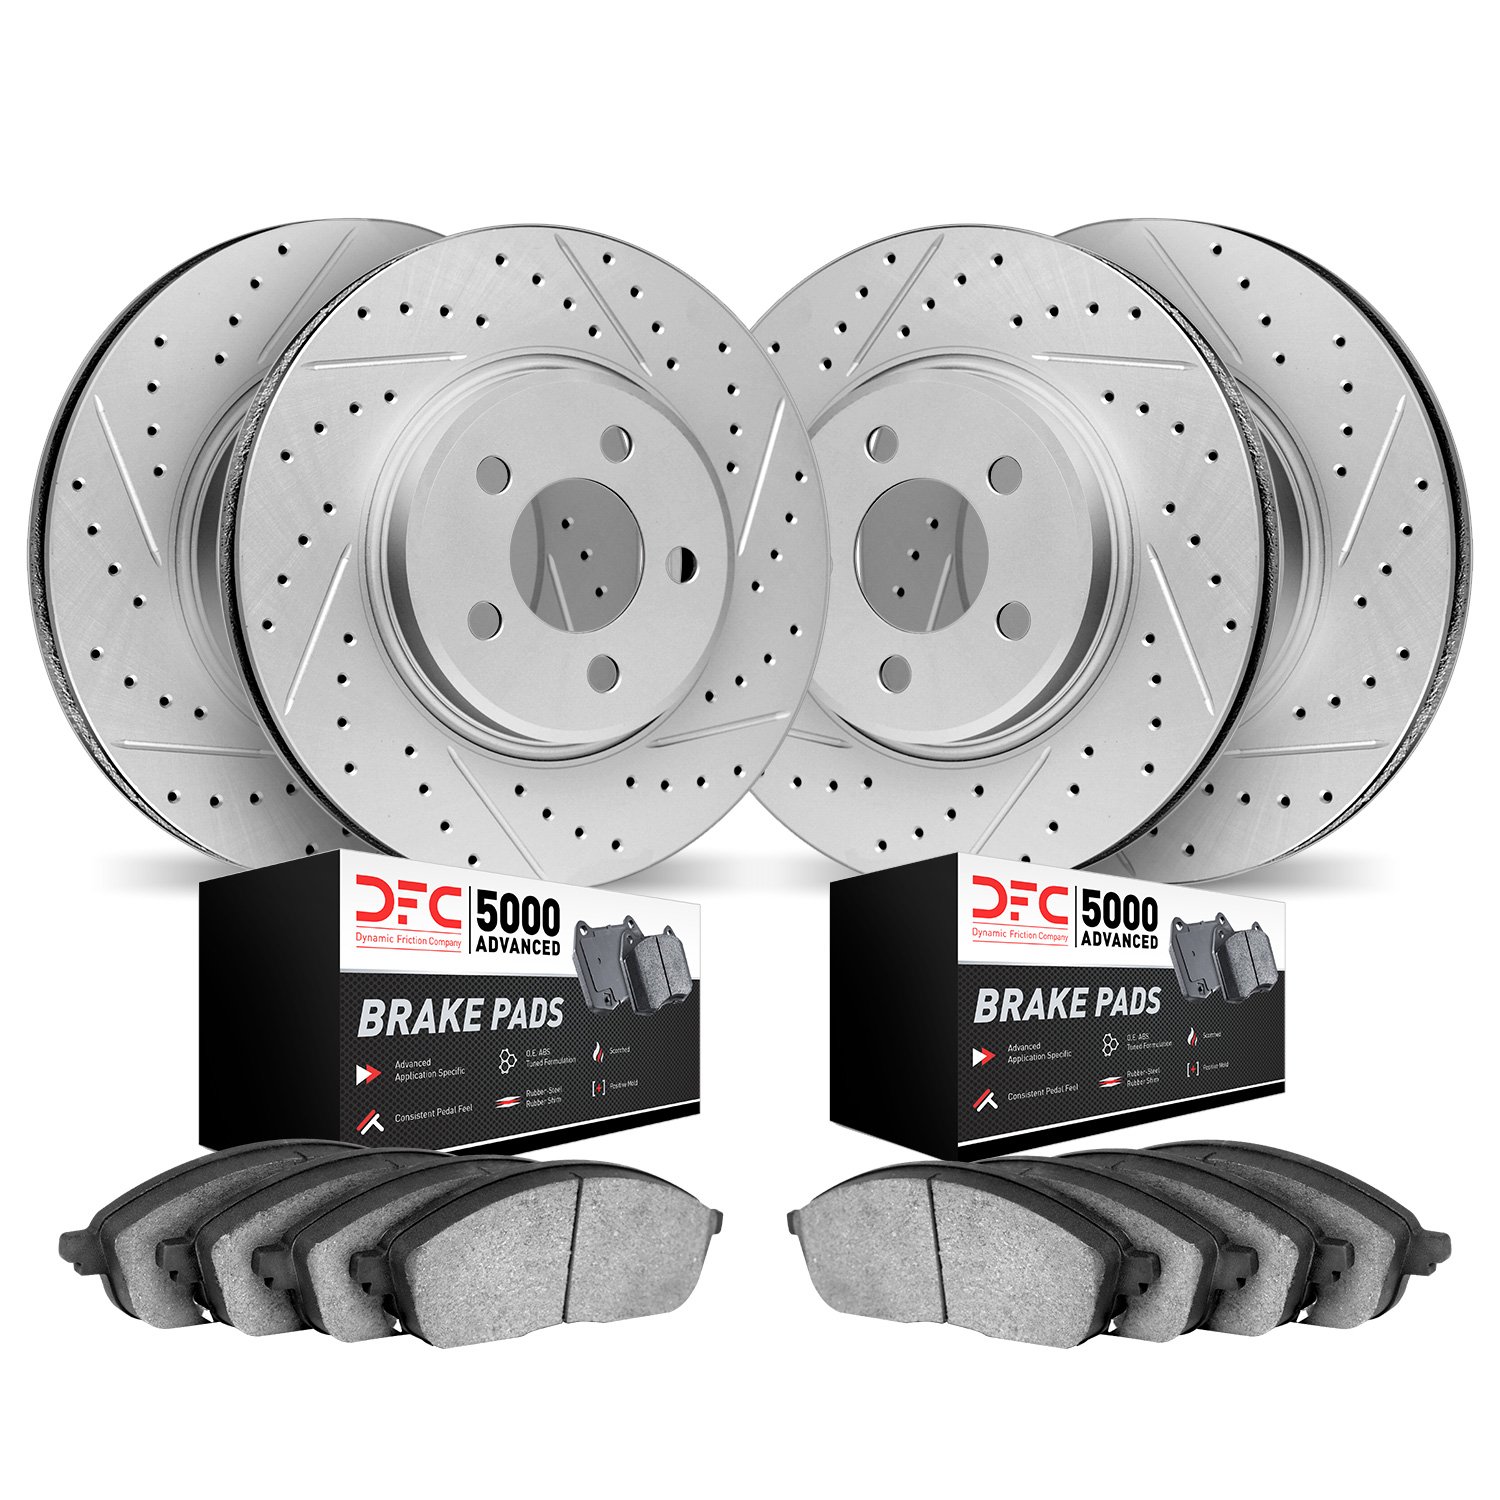 2504-46027 Geoperformance Drilled/Slotted Rotors w/5000 Advanced Brake Pads Kit, 2013-2015 GM, Position: Front and Rear